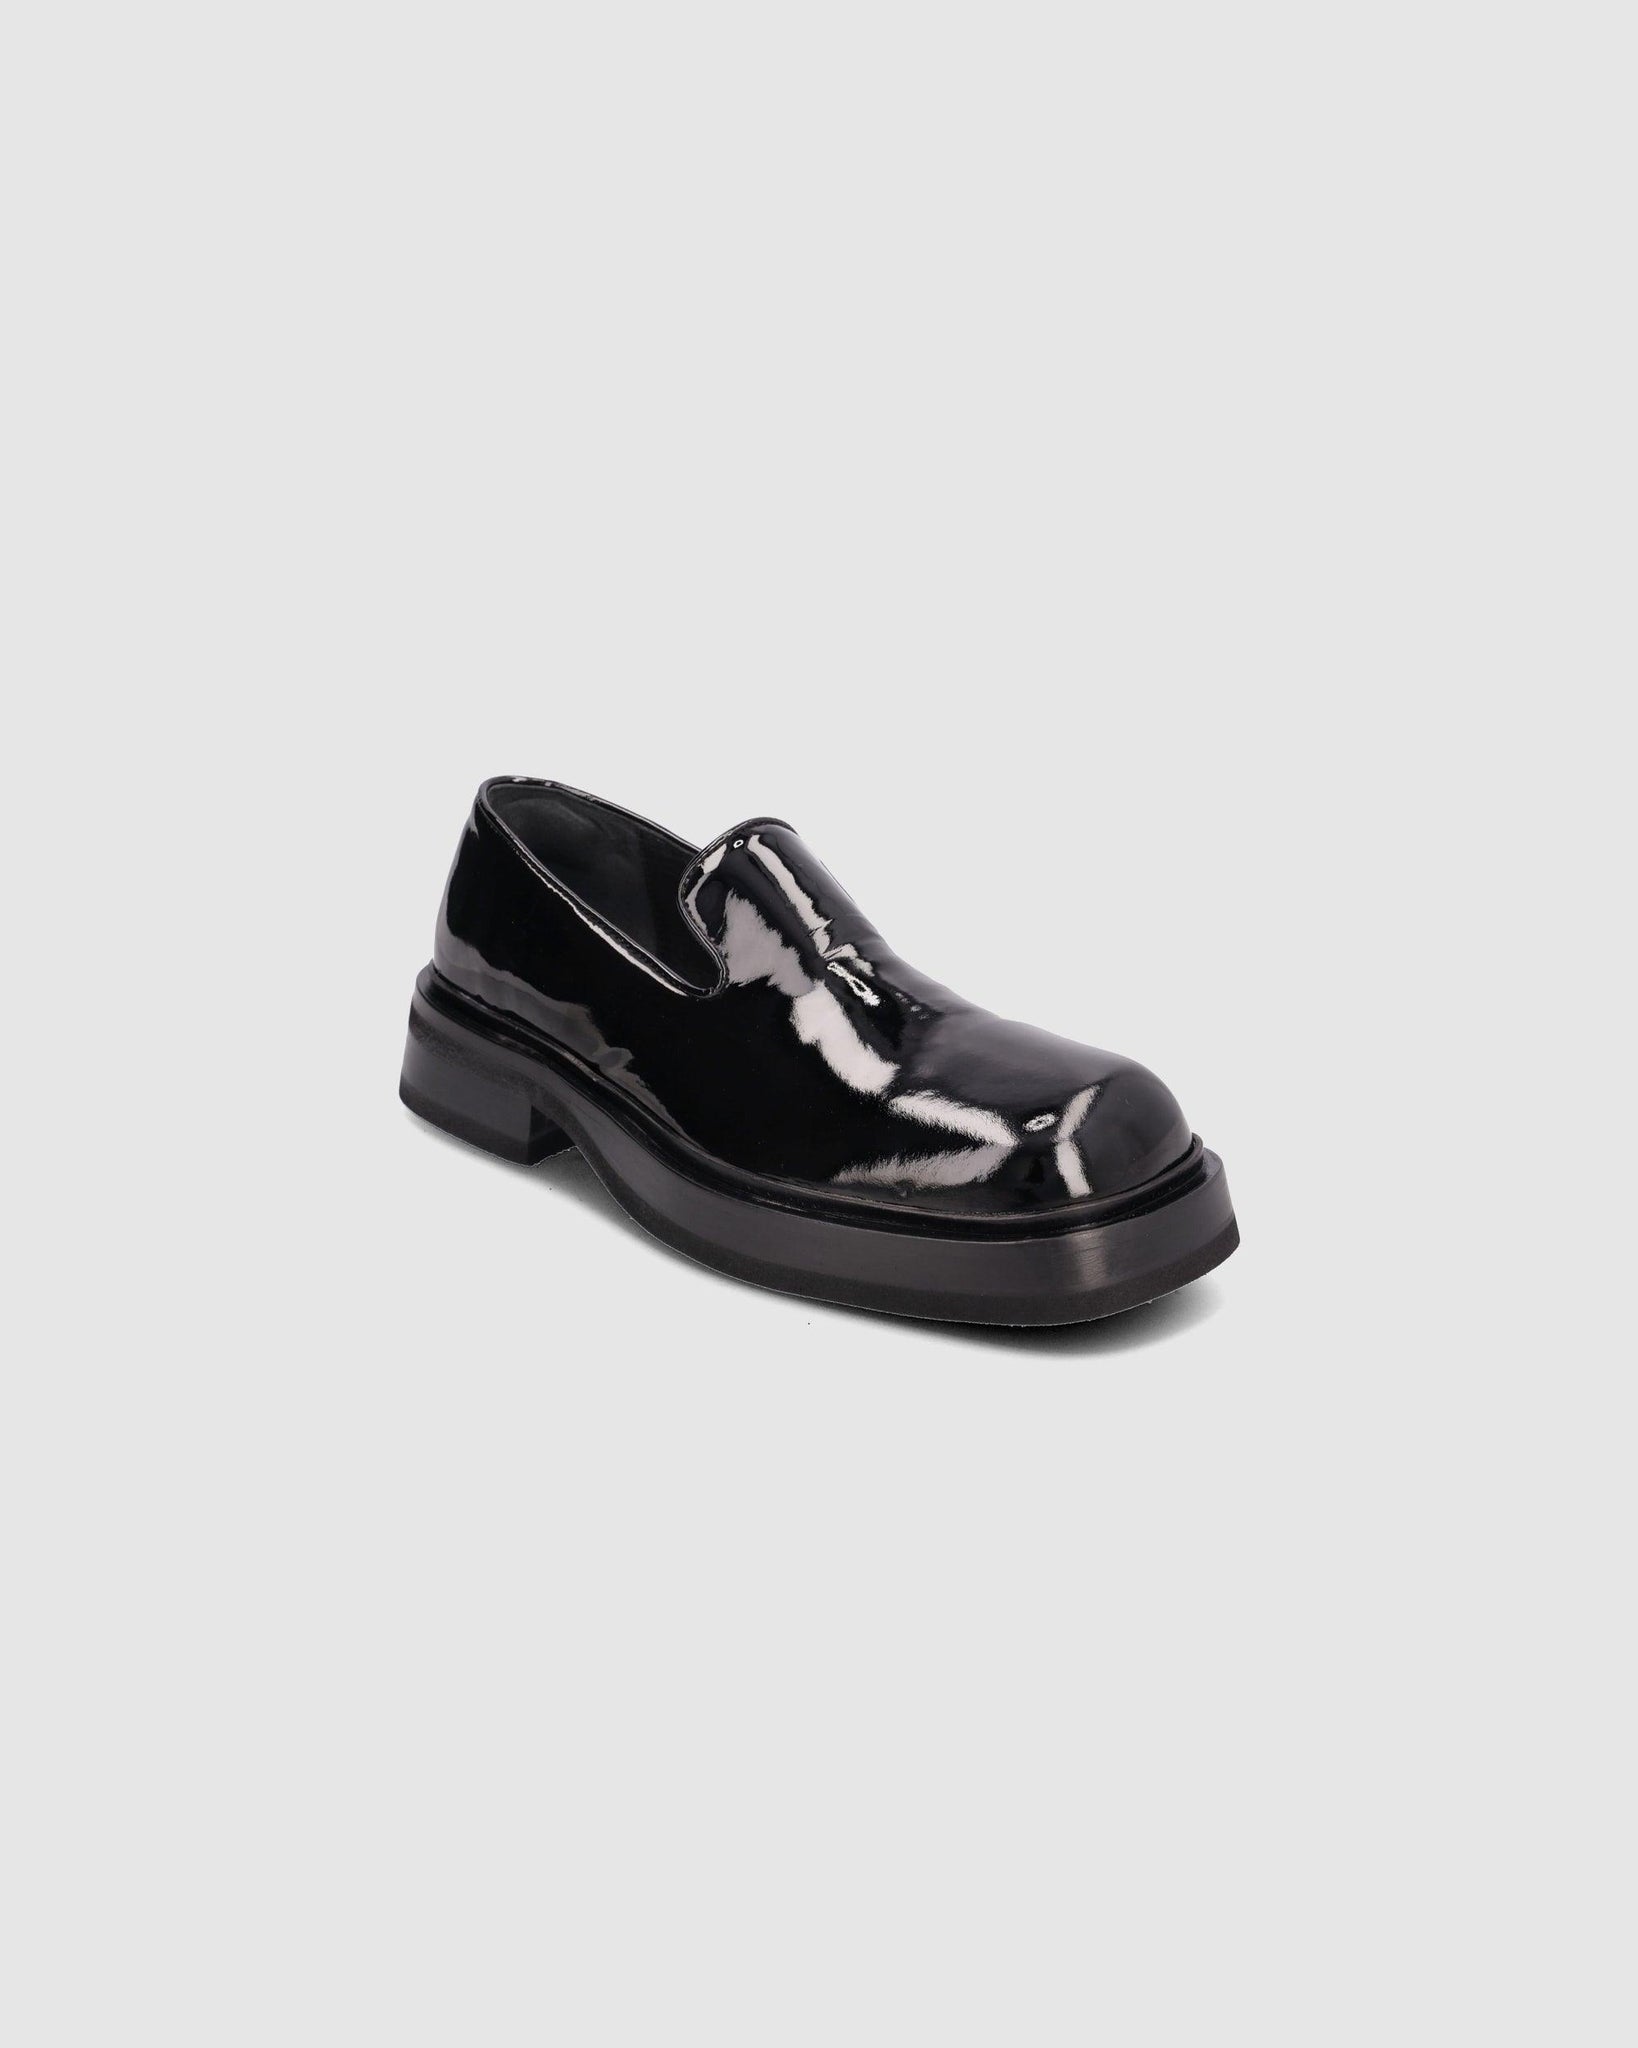 Chateau Patent Loafer Black - {{ collection.title }} - Chinatown Country Club 